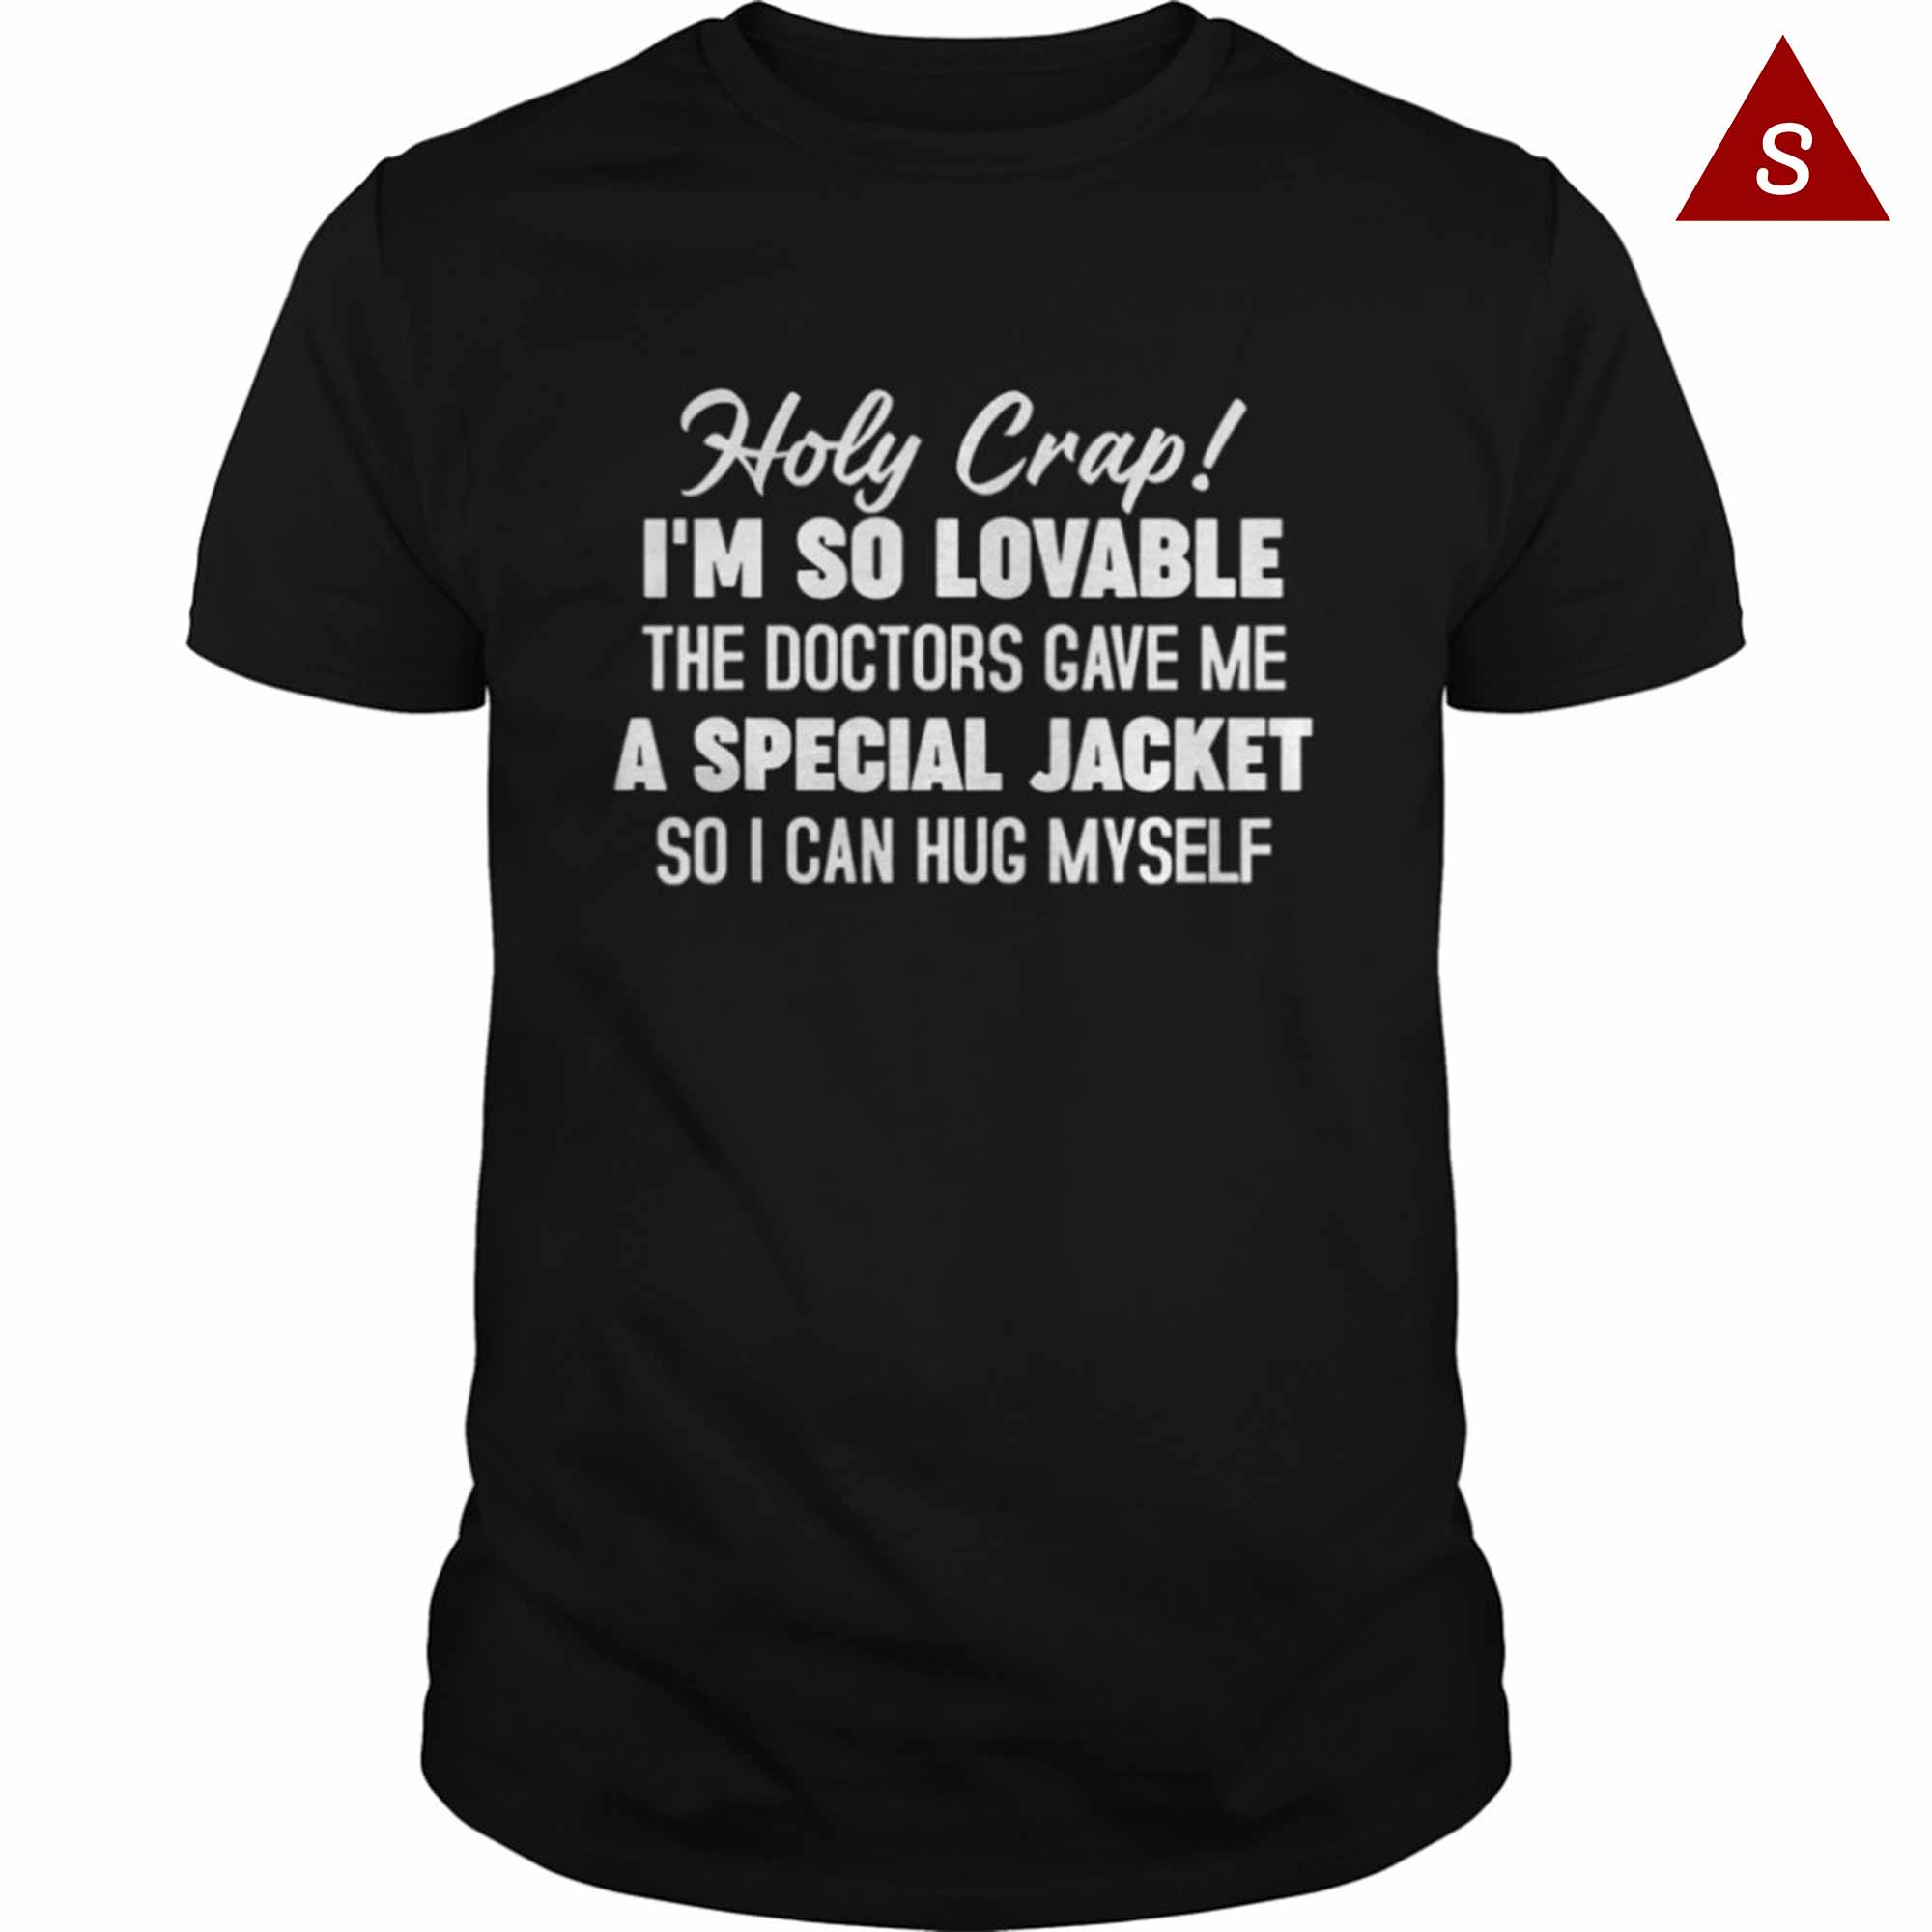 Skitongift Funny Tshirt Holy Crap I’m So Lovable The Doctors Gave Me A Special T Shirt